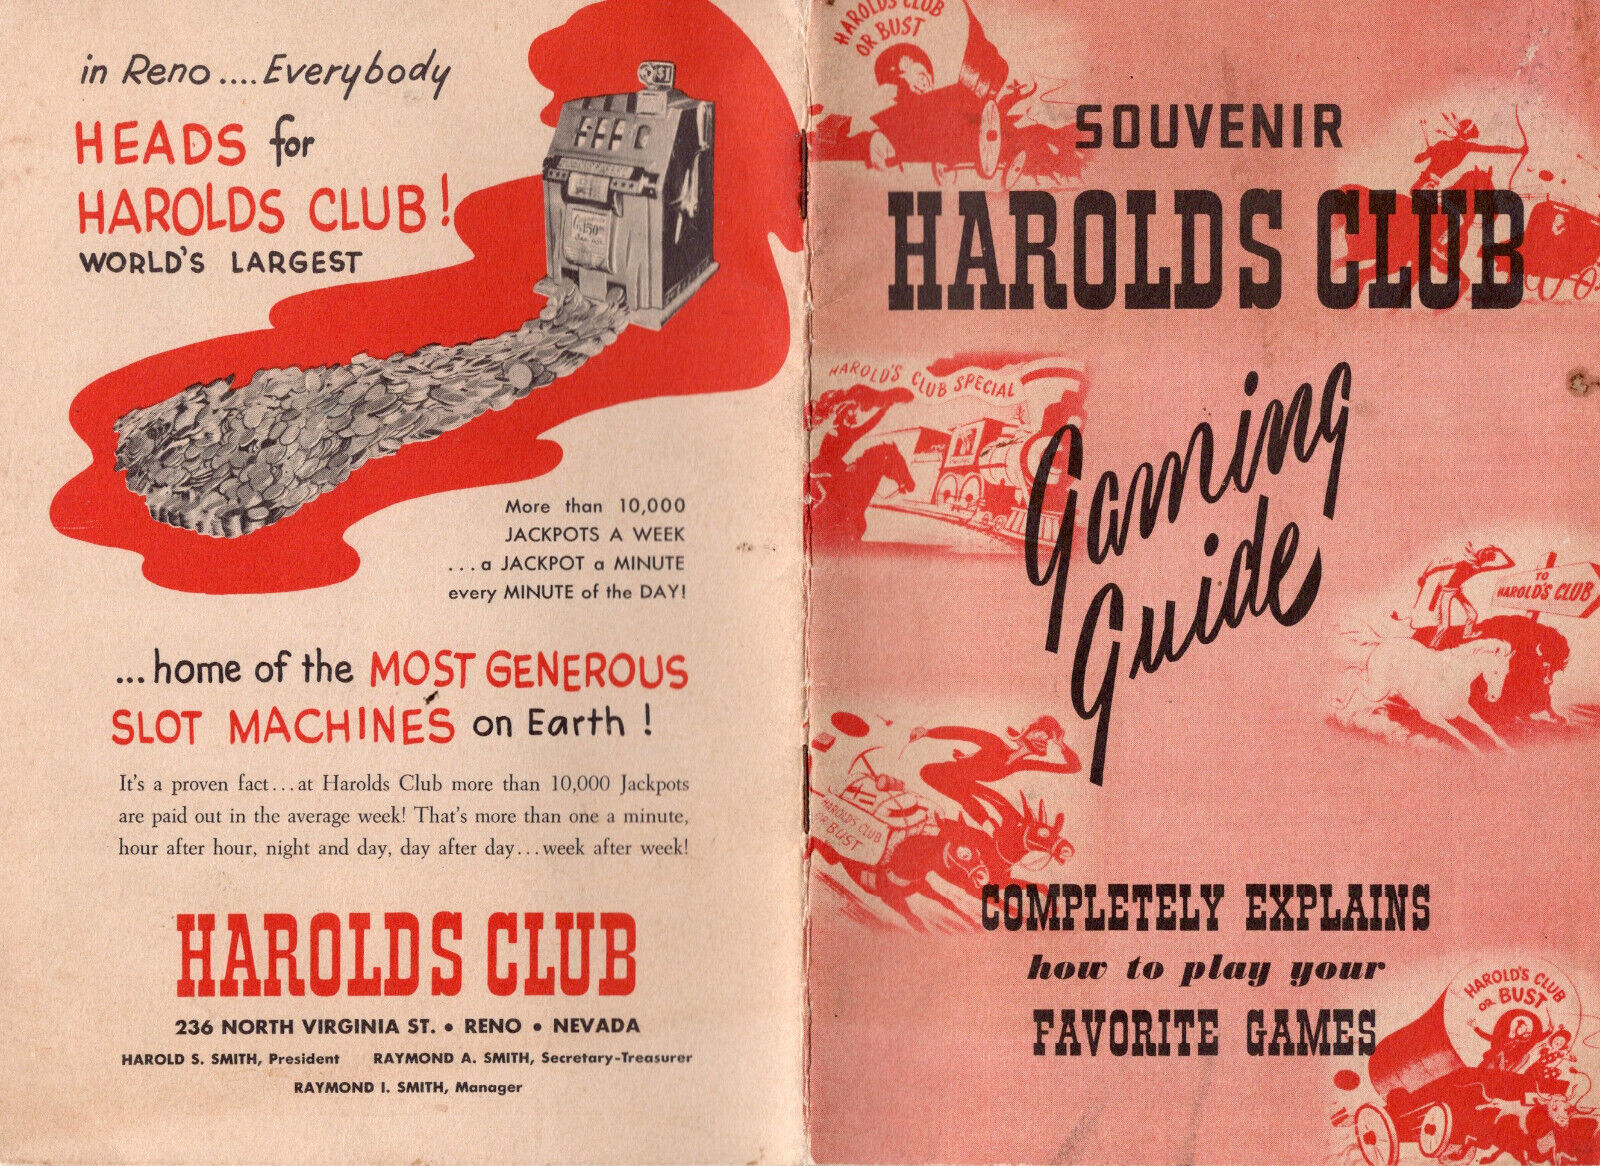 Harolds Club Souvenir Gaming Guide How to Play Various Games 1949 Booklet